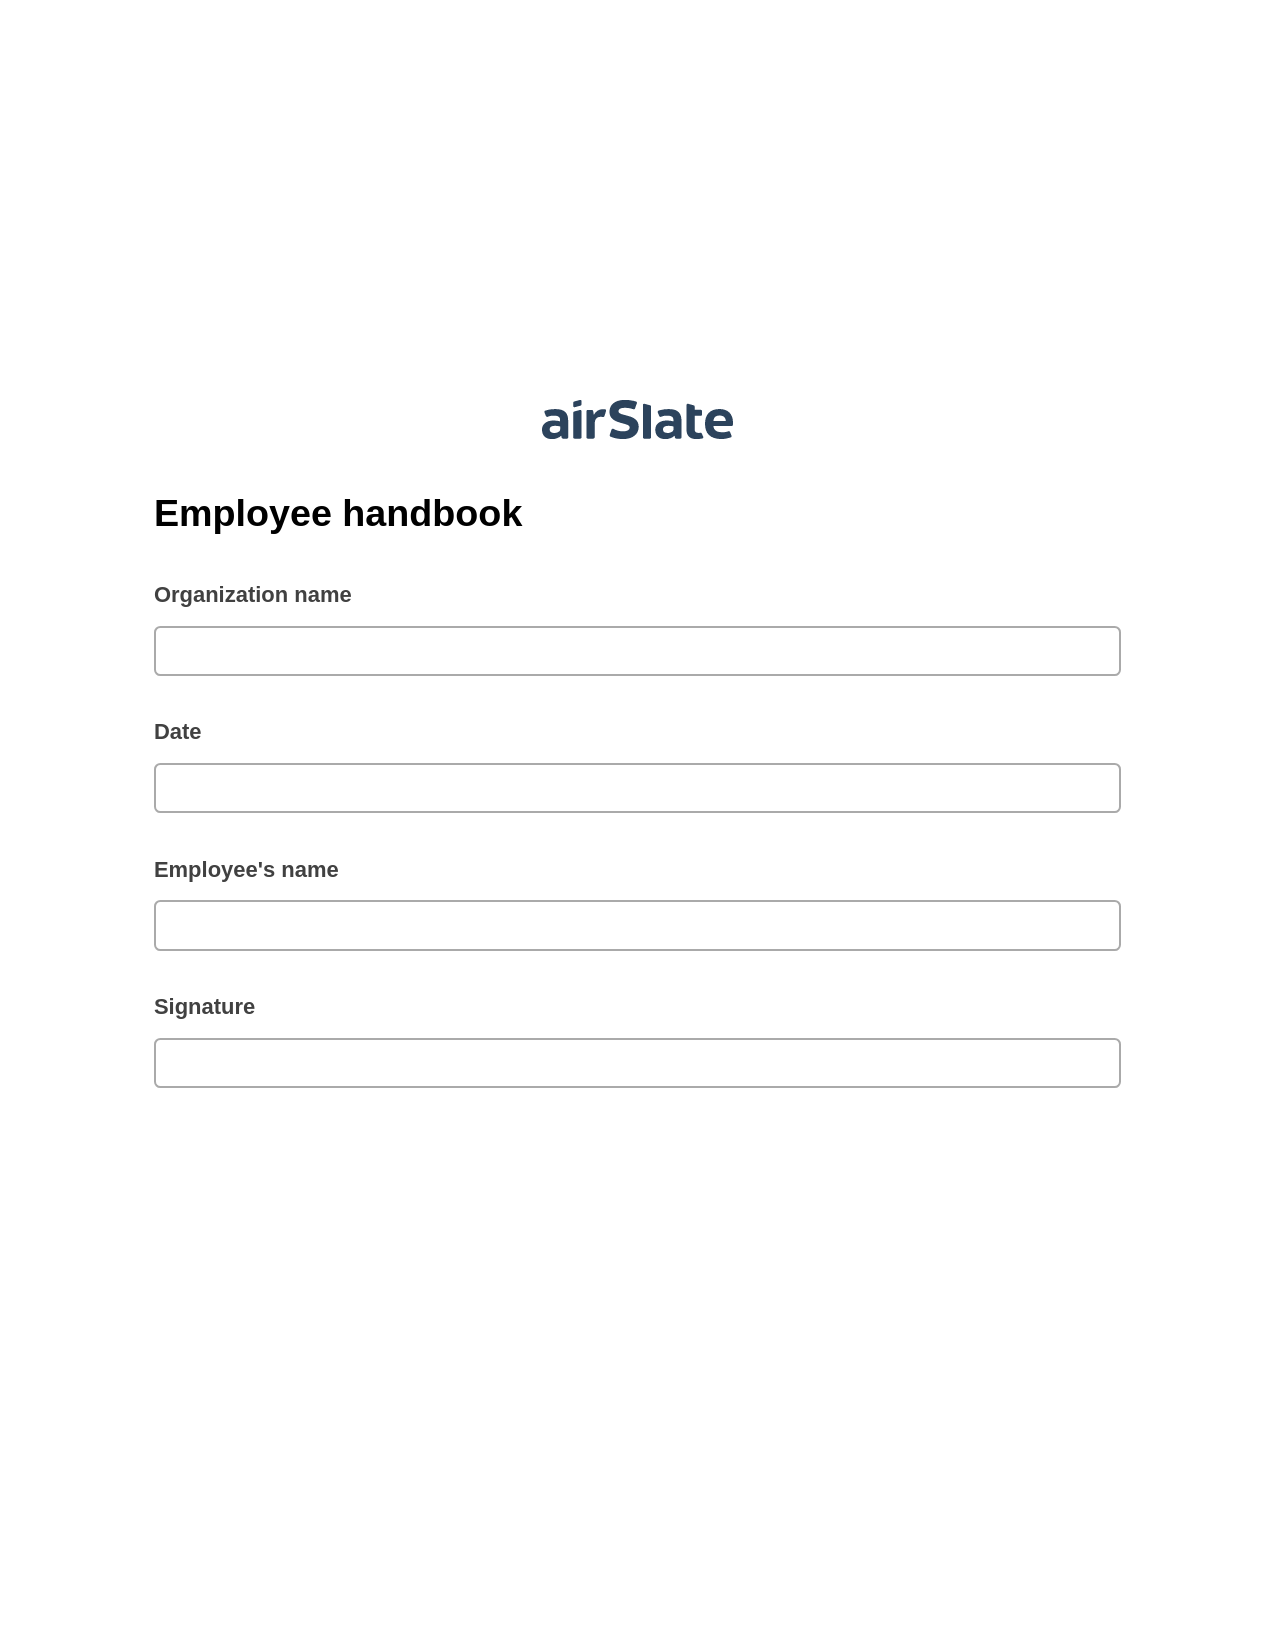 Multirole Employee handbook Pre-fill Dropdown from Airtable, Create slate addon, Export to NetSuite Record Bot